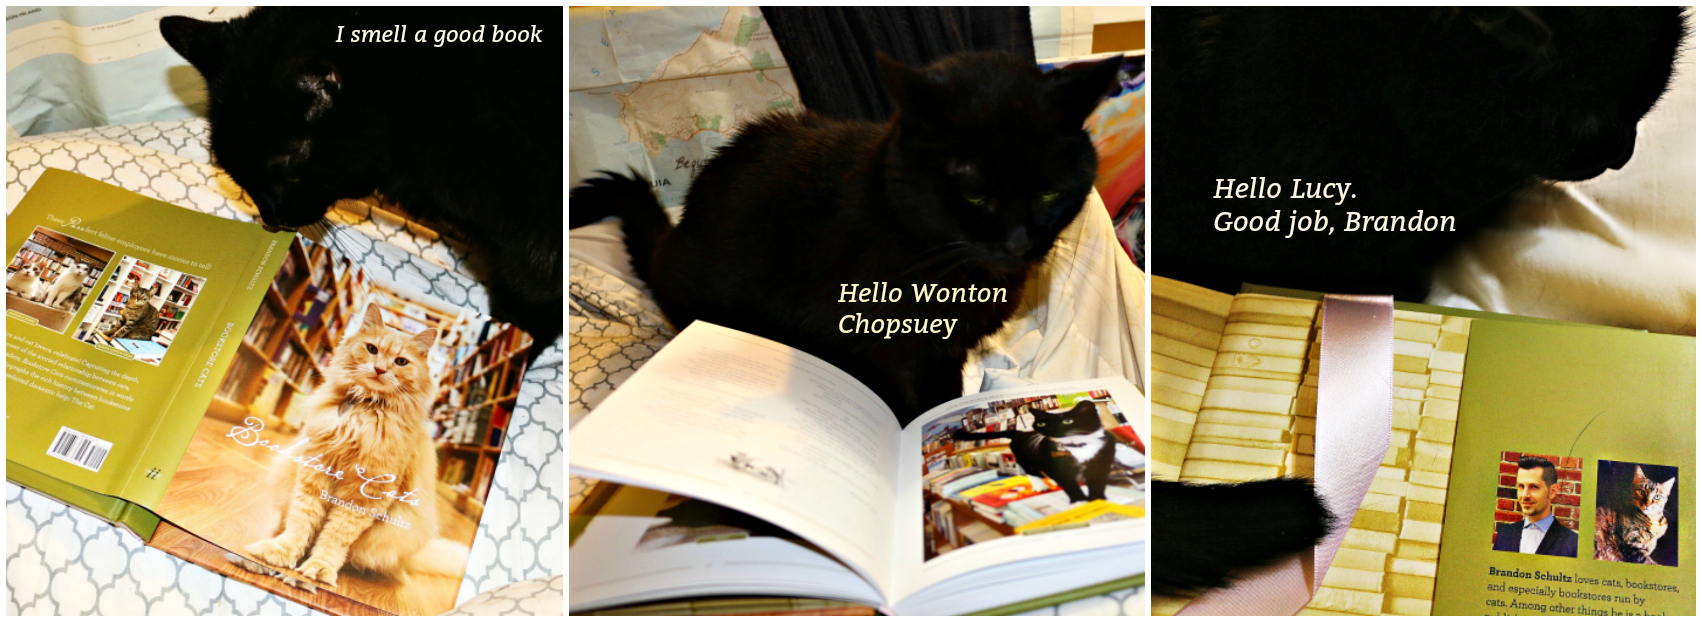 Bookstore_cats_book_giveaway